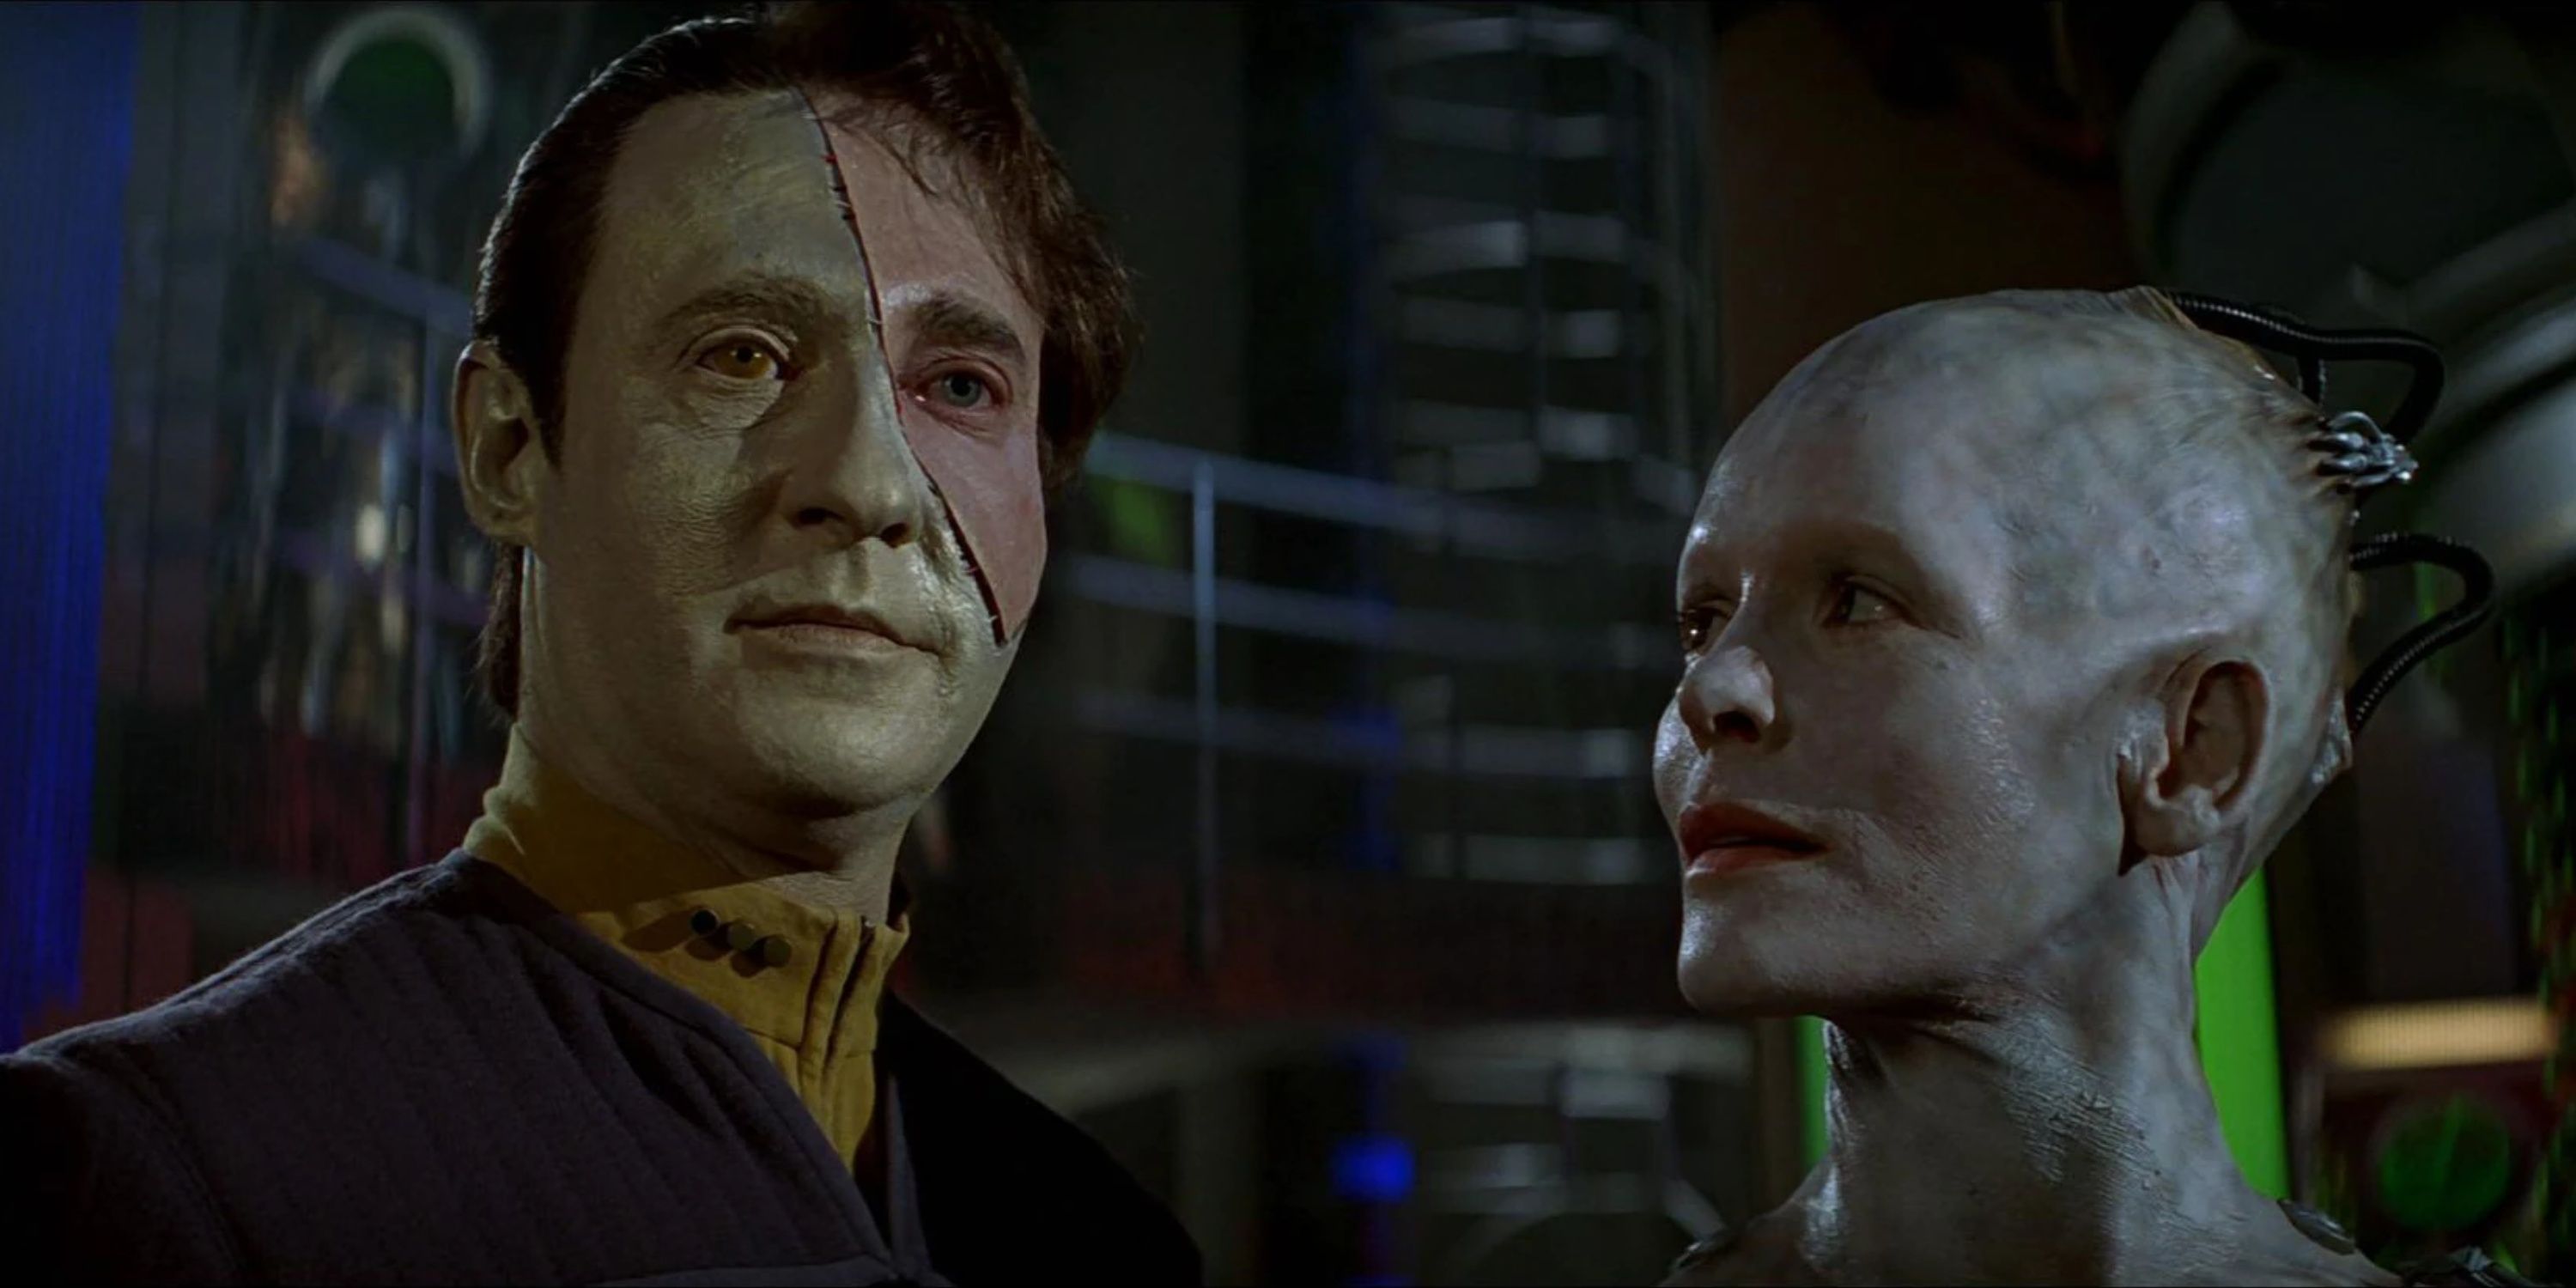 human data and the borg queen